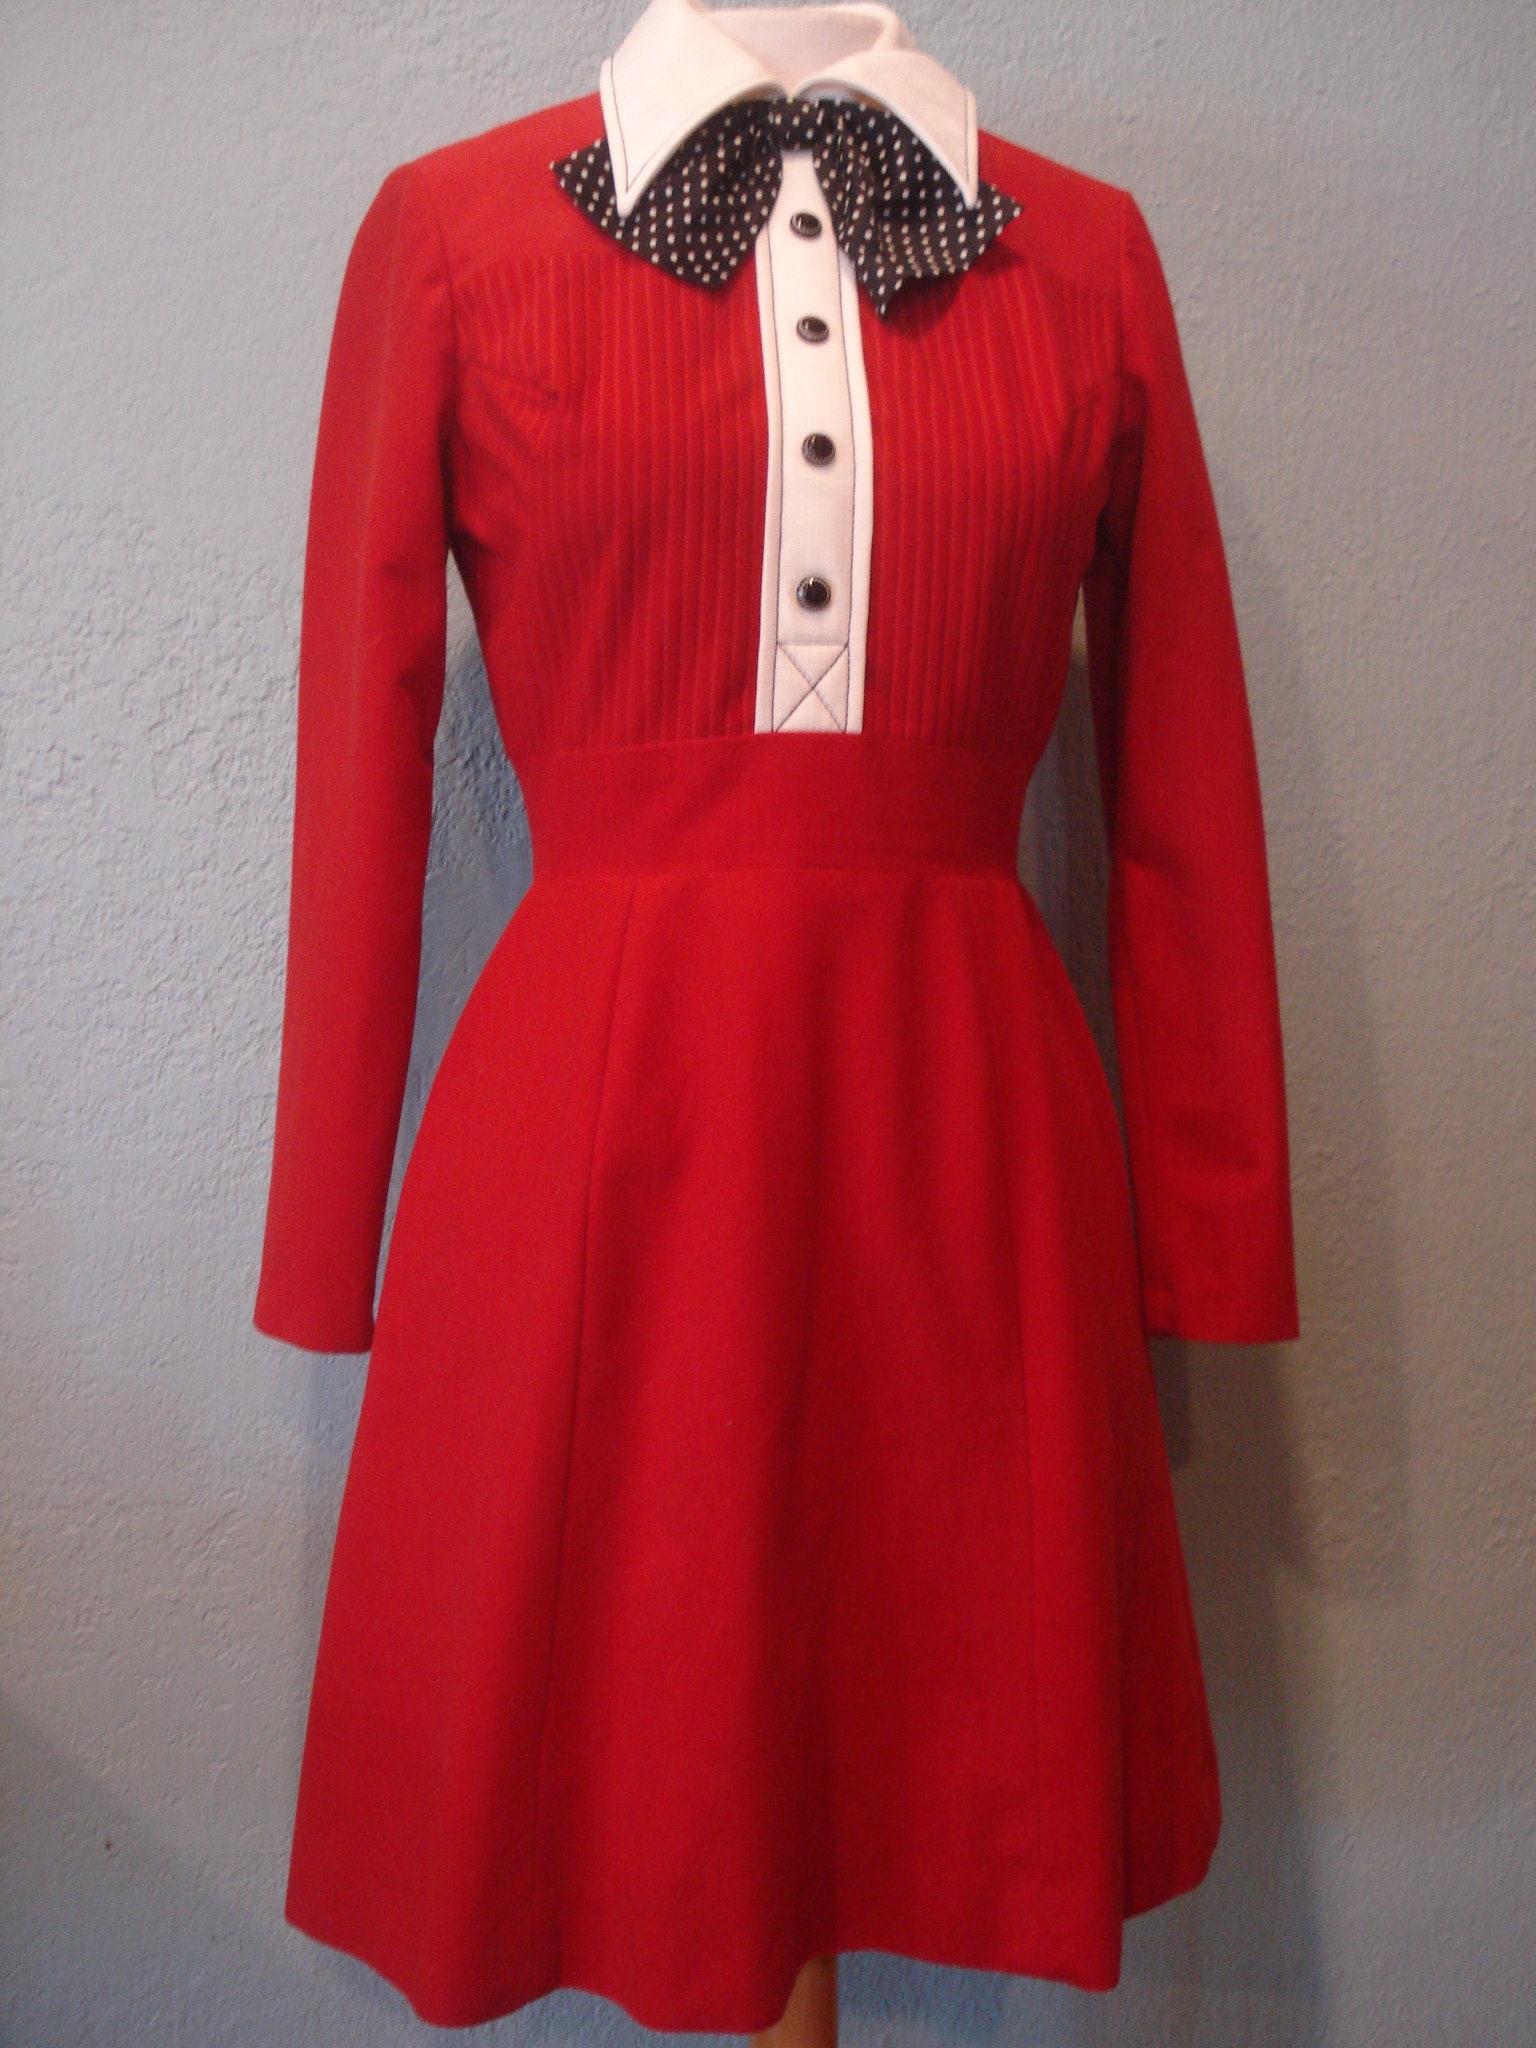 Vtg 60's Mod Gay Gibson Dress Jr. size 9 Bright Red with white pointed ...